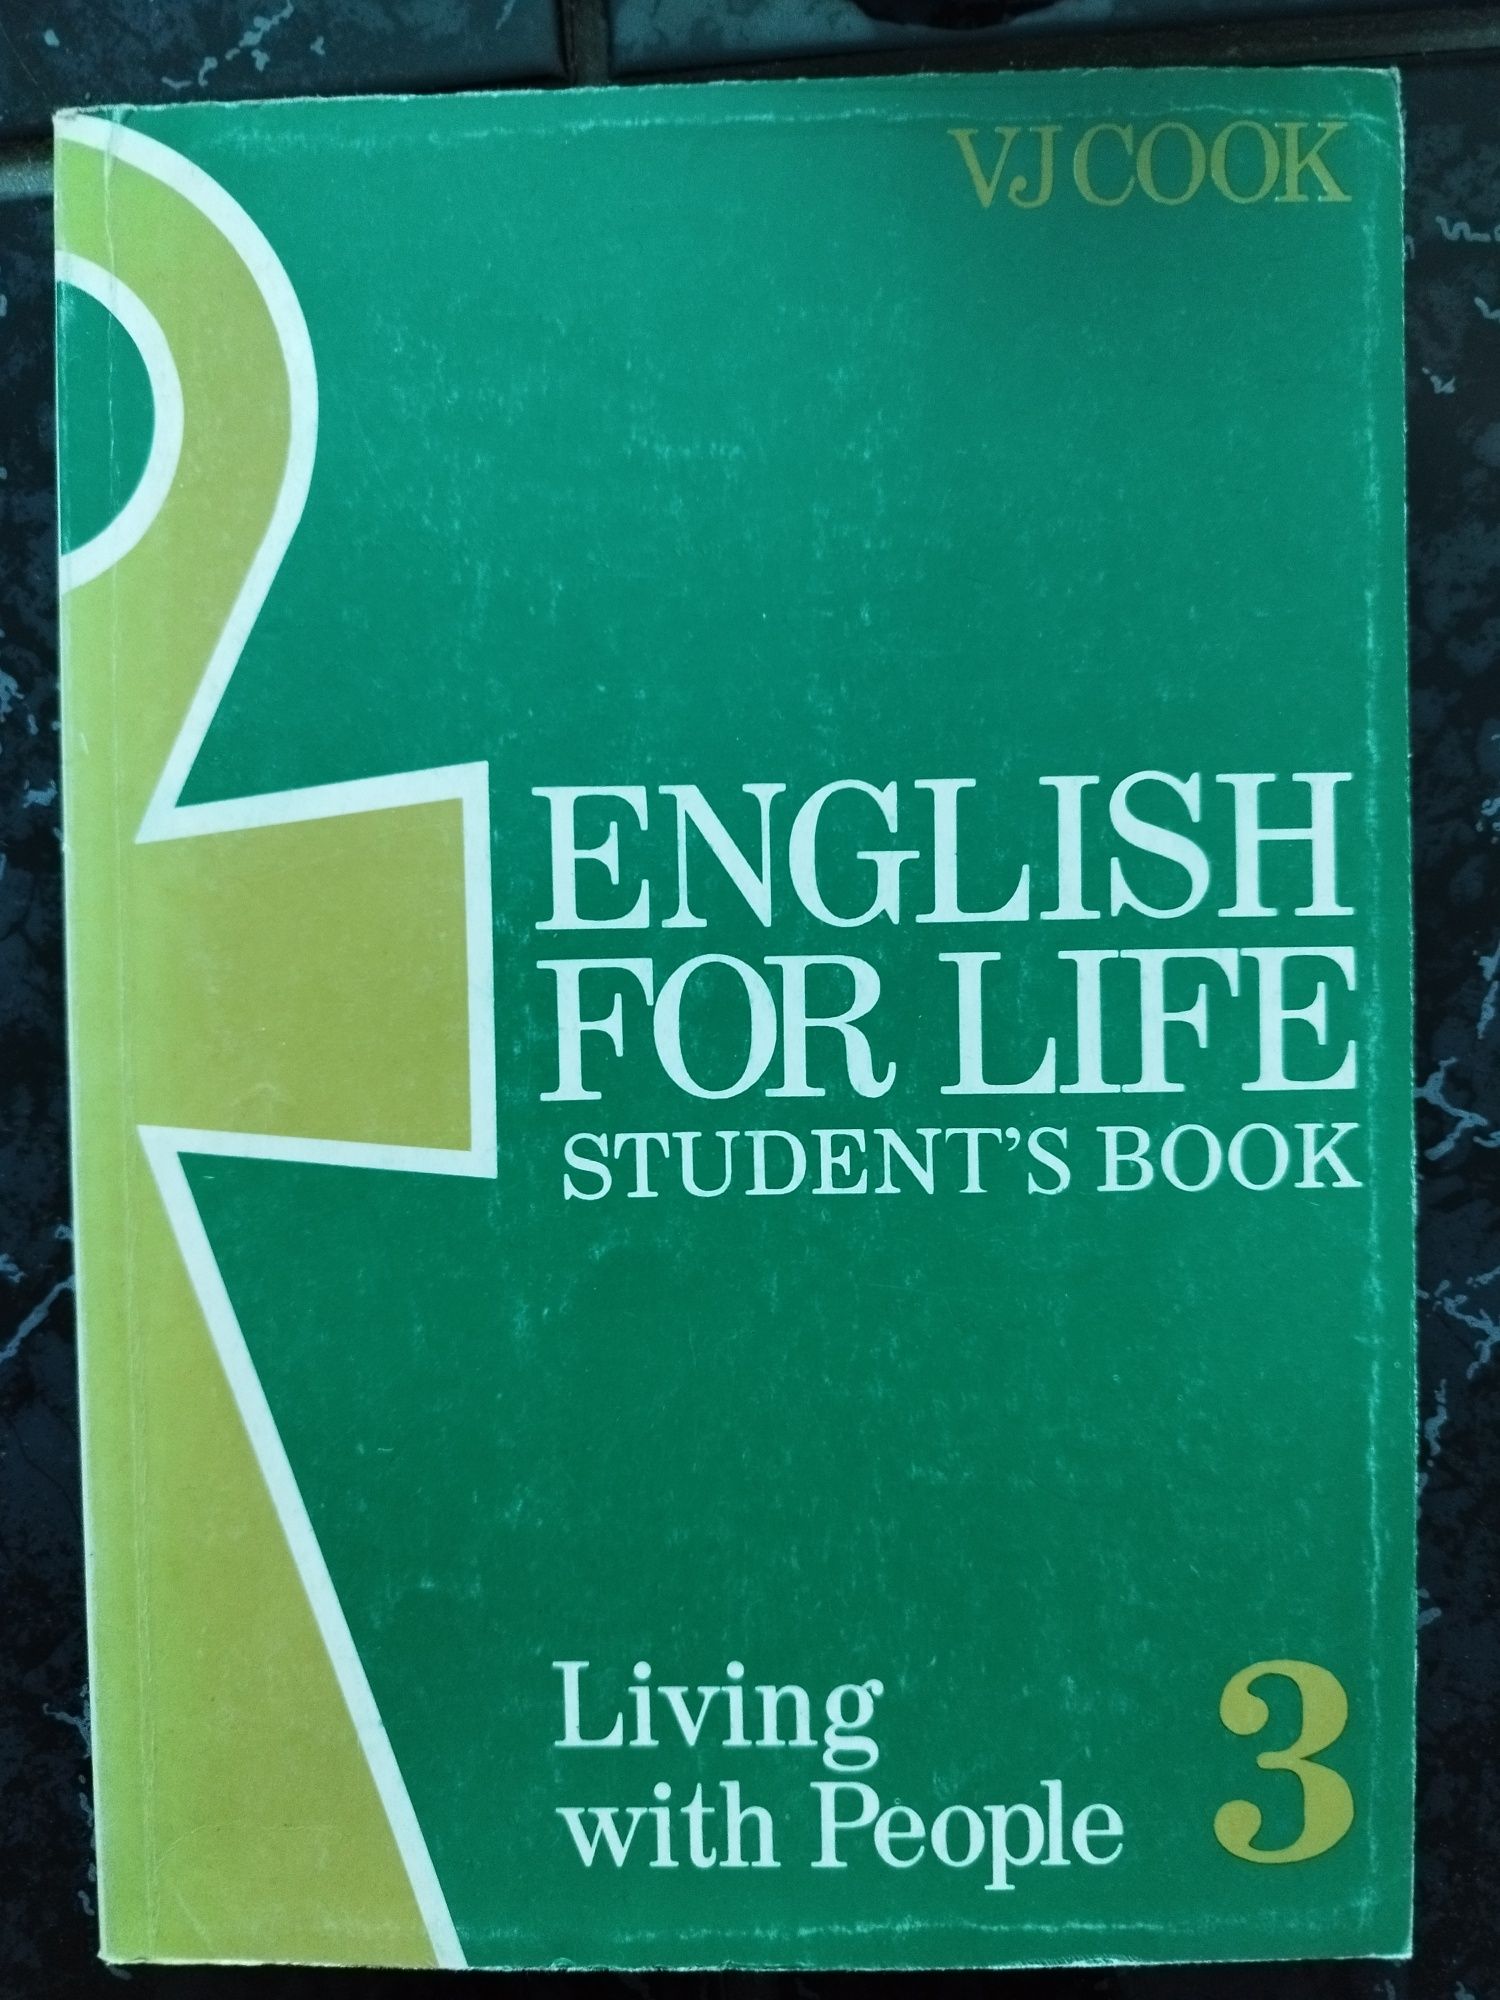 Student's book Englisch for Life